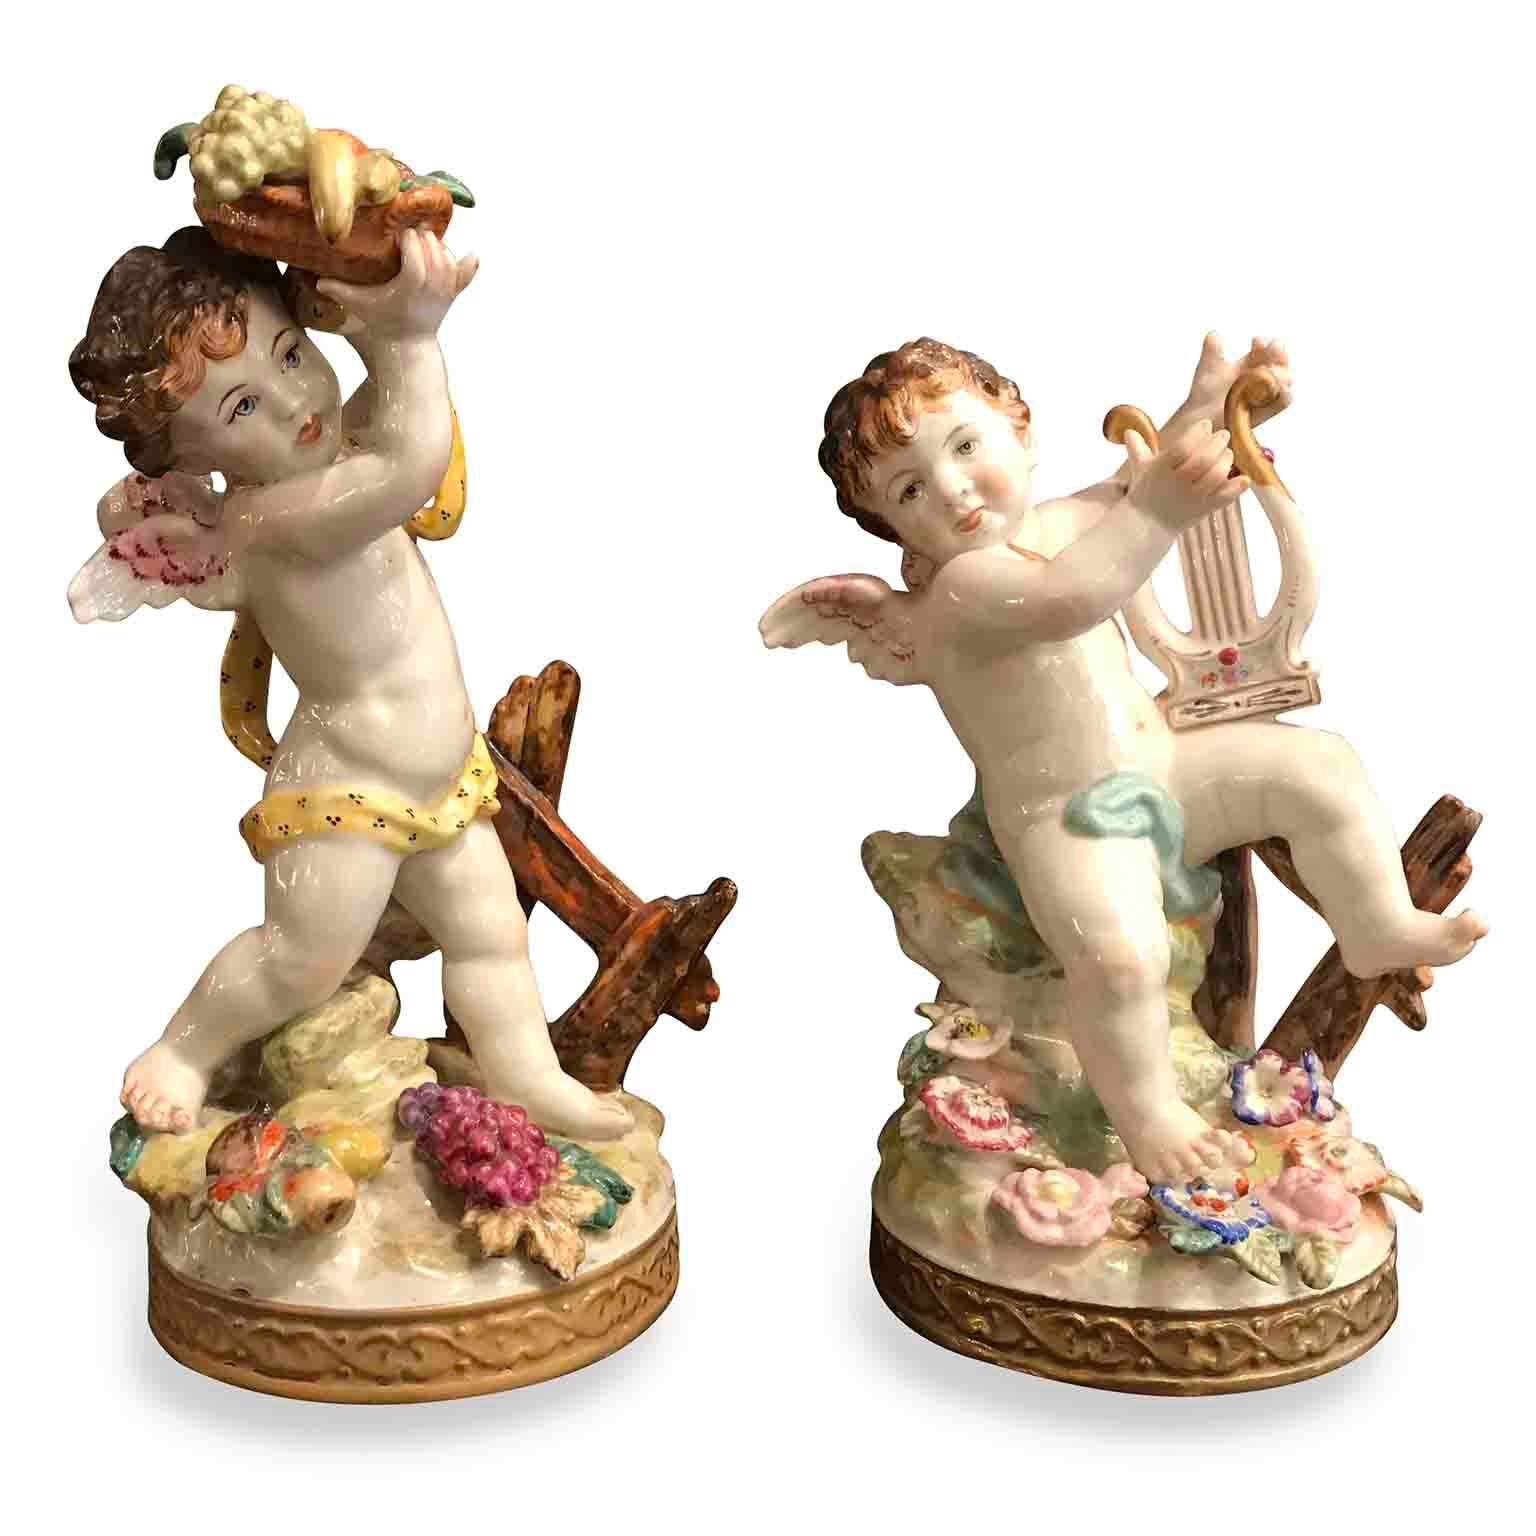 Pair of handmade polychrome porcelain sculptures depicting two winged angels, a pair of fine putti, one holding a fruit basket, Allegory of  abundance, measuring 10,24 inches / 26 cms high and a Lyre player Cherub, allegory of music,  8,66 inches /